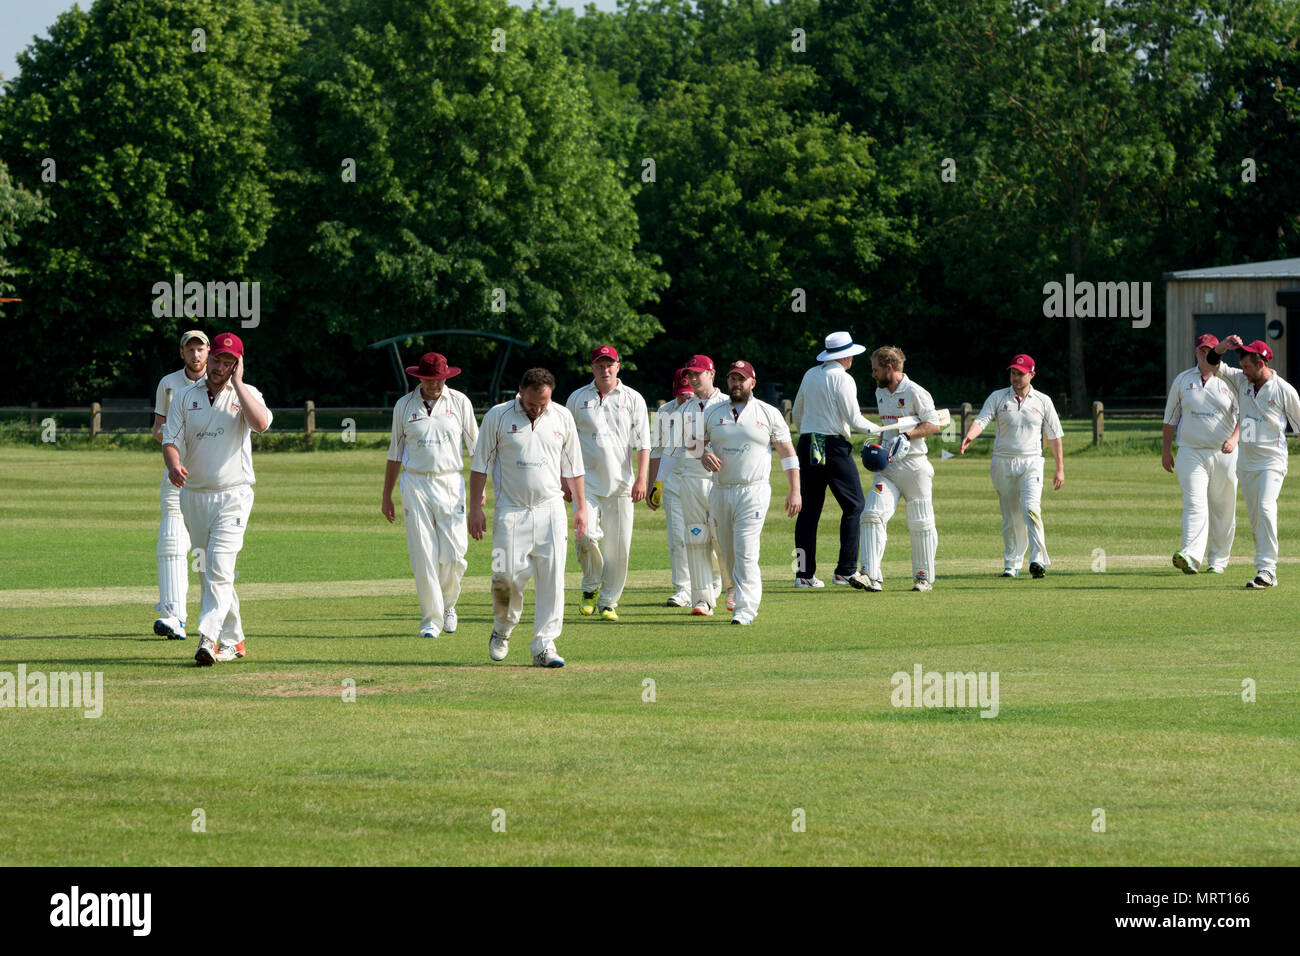 Village cricket at Wellesbourne, Warwickshire, England, UK. Players leaving the pitch after the match. Stock Photo